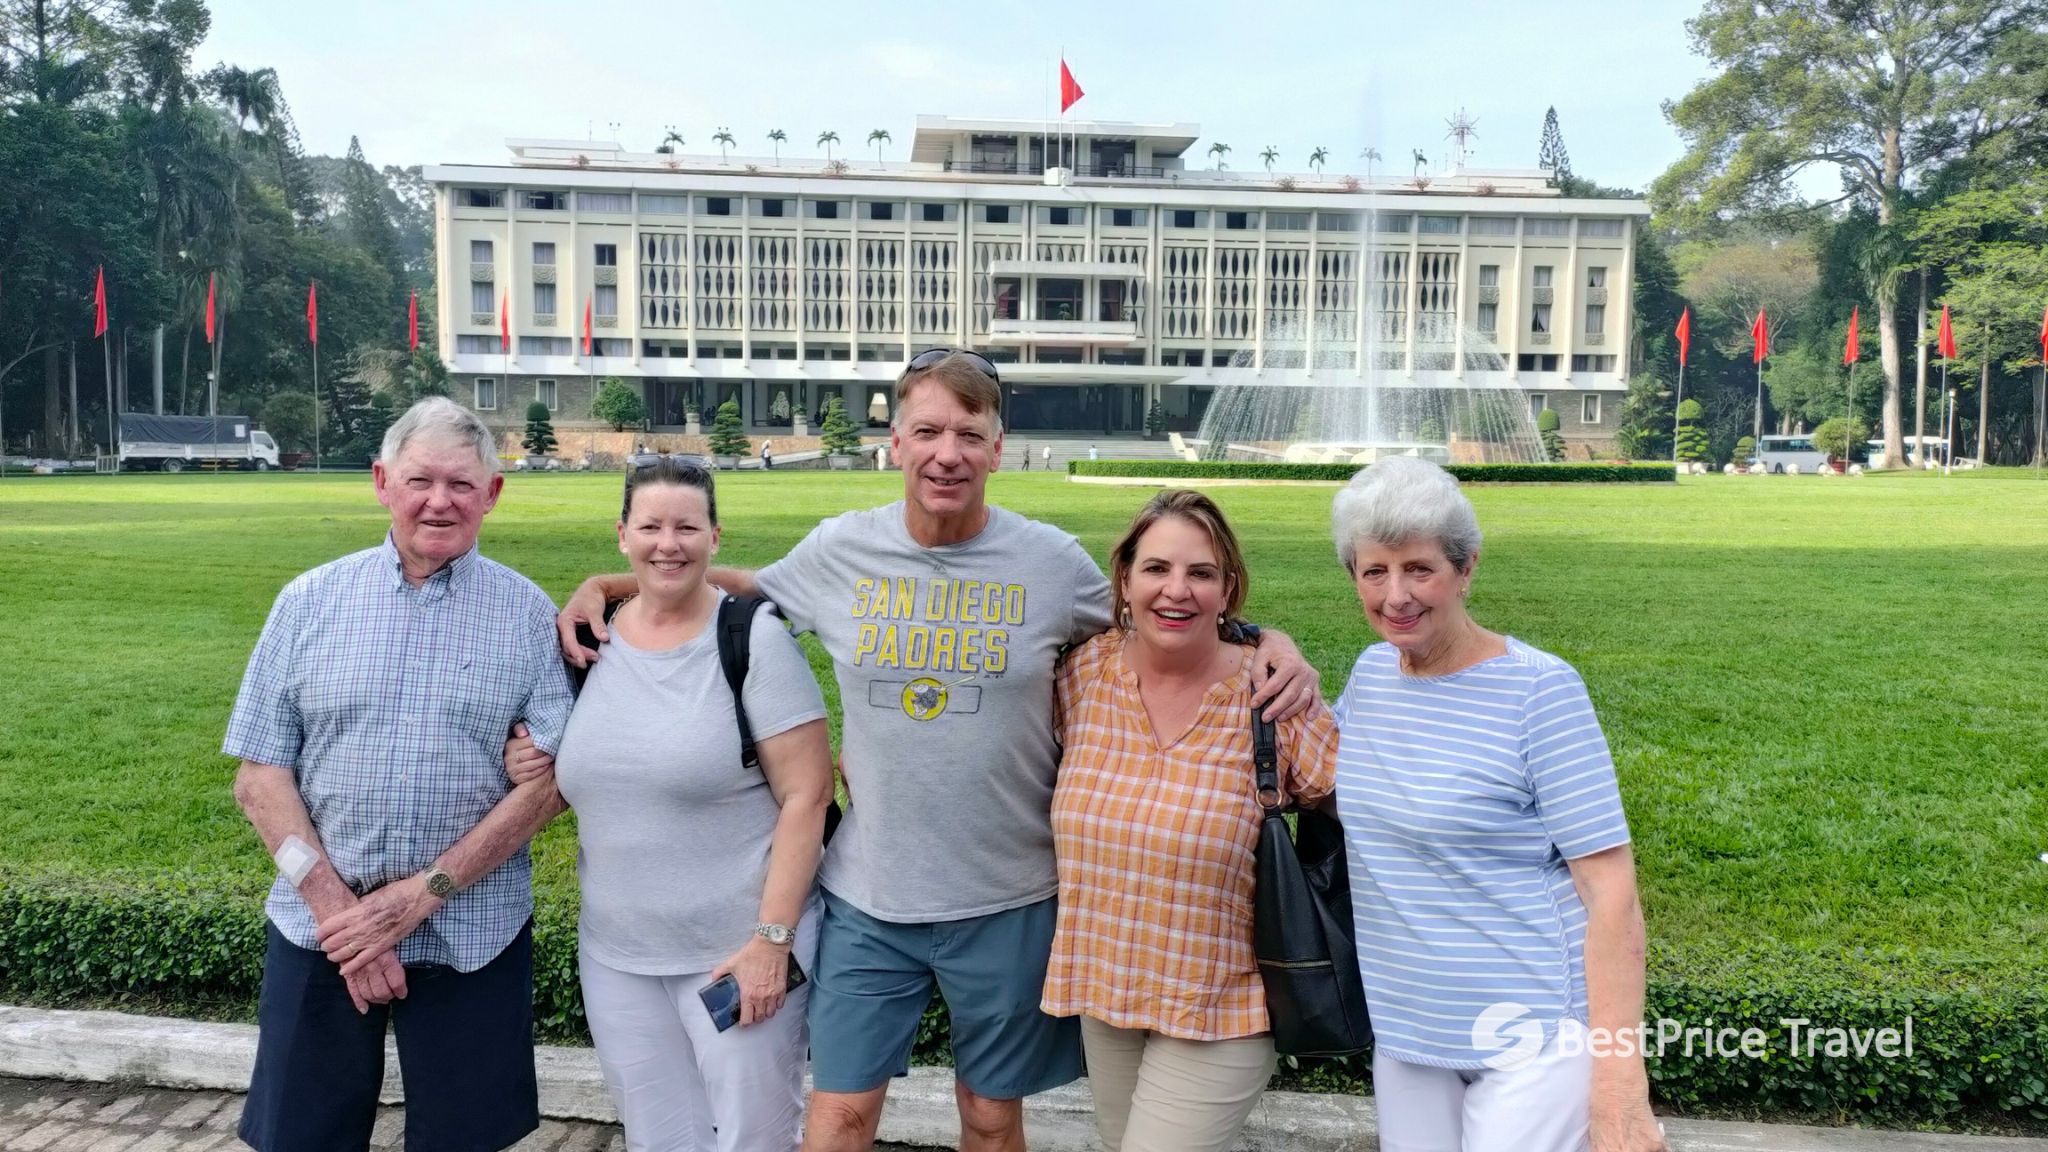 Day 2 Check In With Your Family In Front Of The Reunification Palace